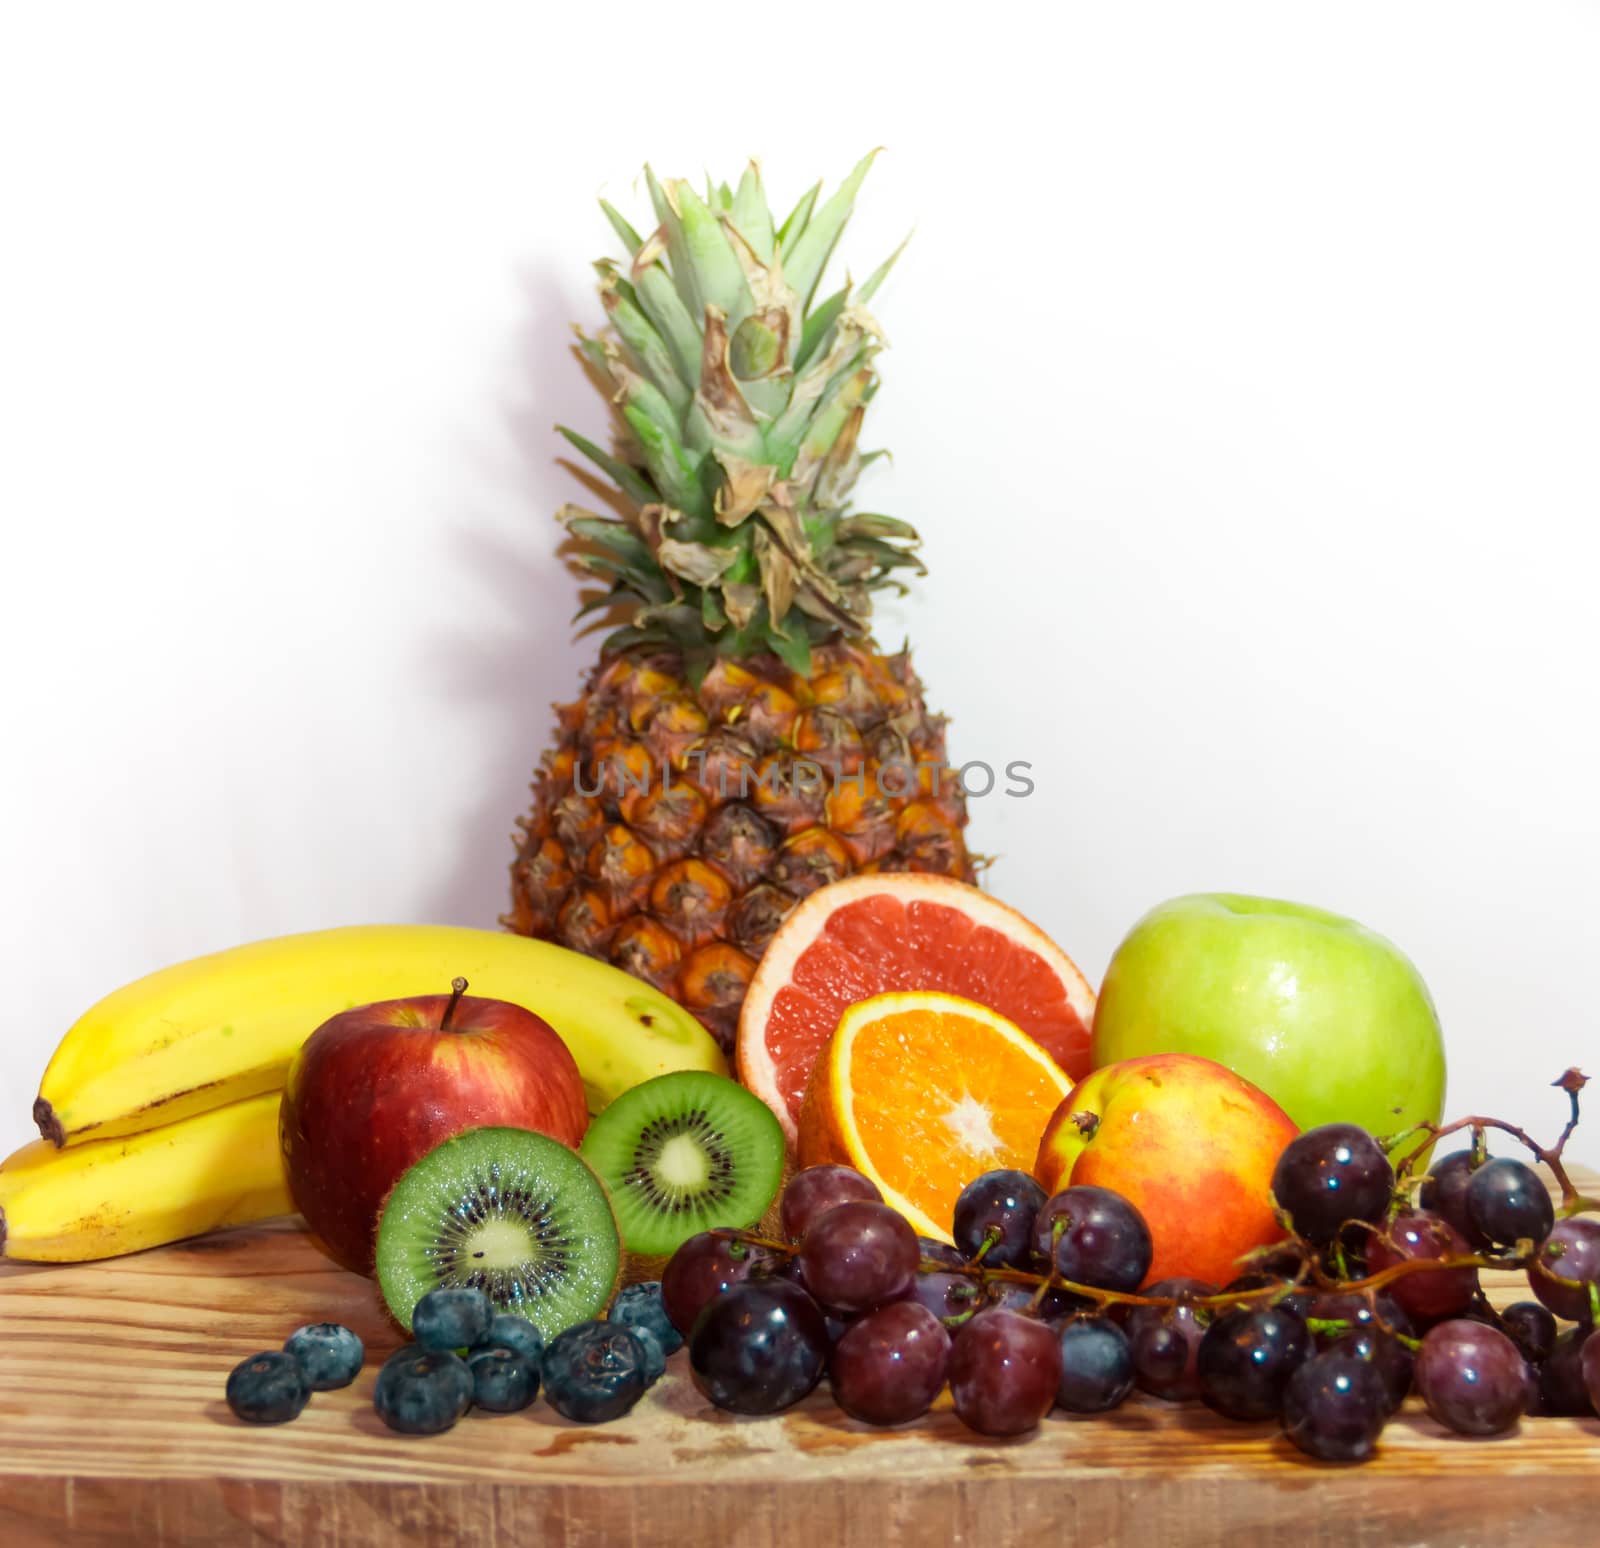 healthy breakfasts with fresh fruits and dried fruits juices, smoothies and fruit salads